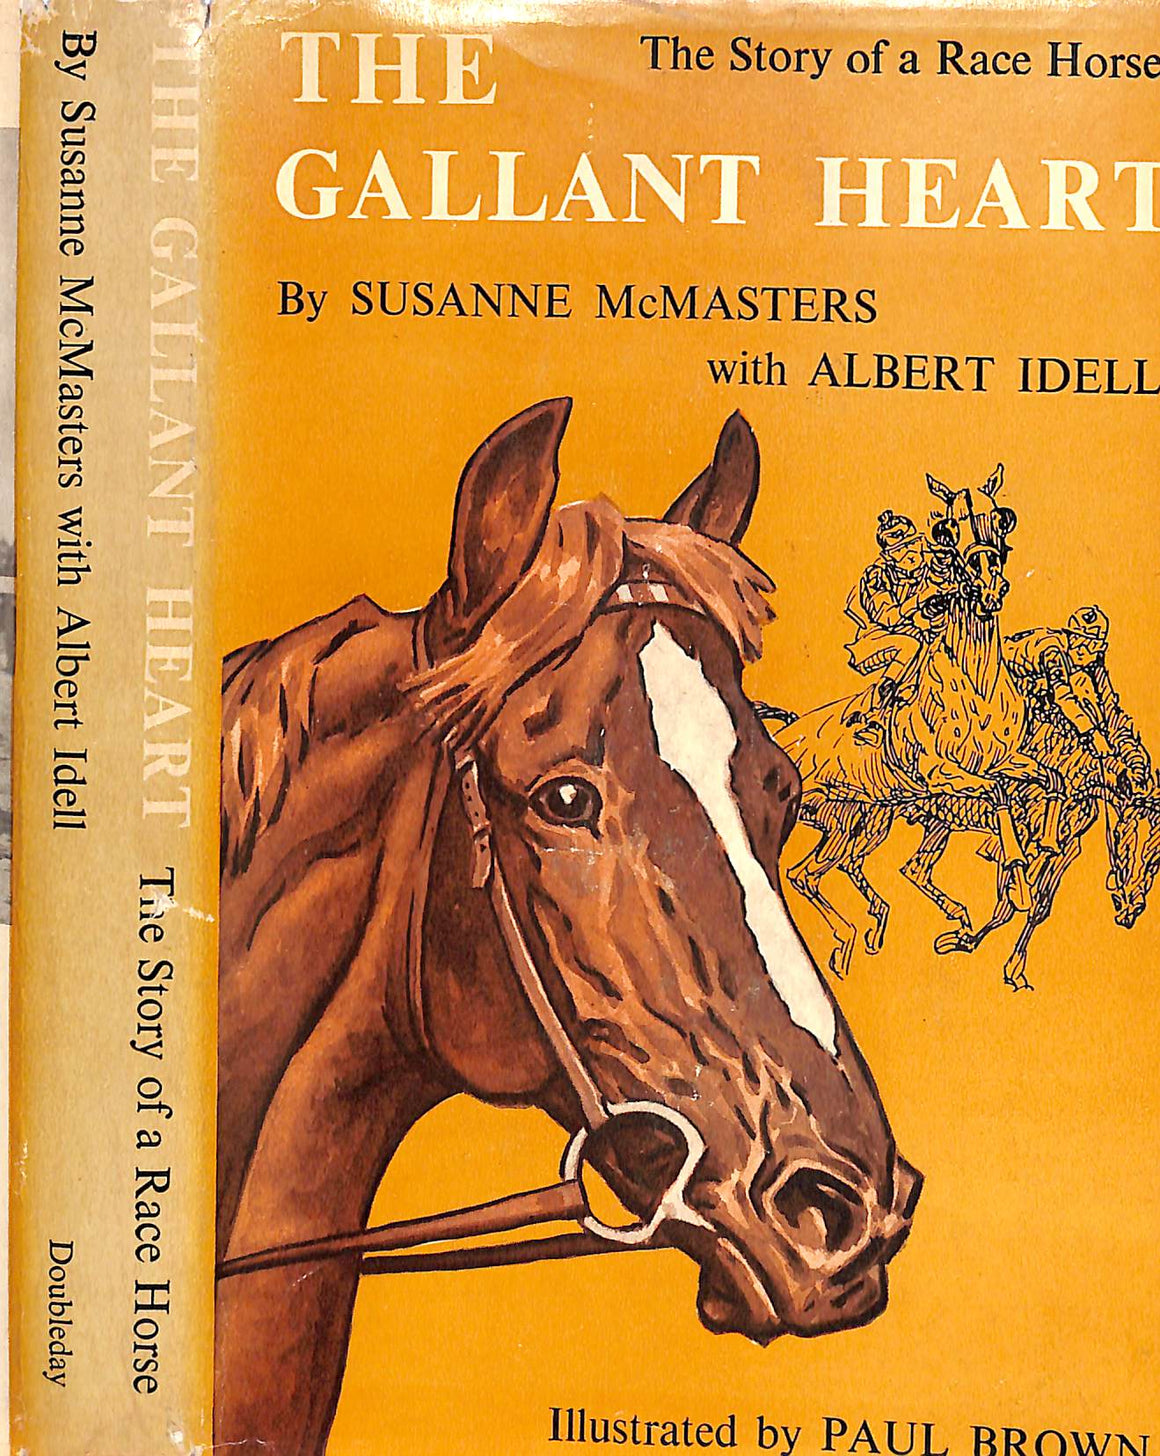 "The Gallant Heart: The Story Of A Race Horse" 1954 MCMASTERS, Susanne